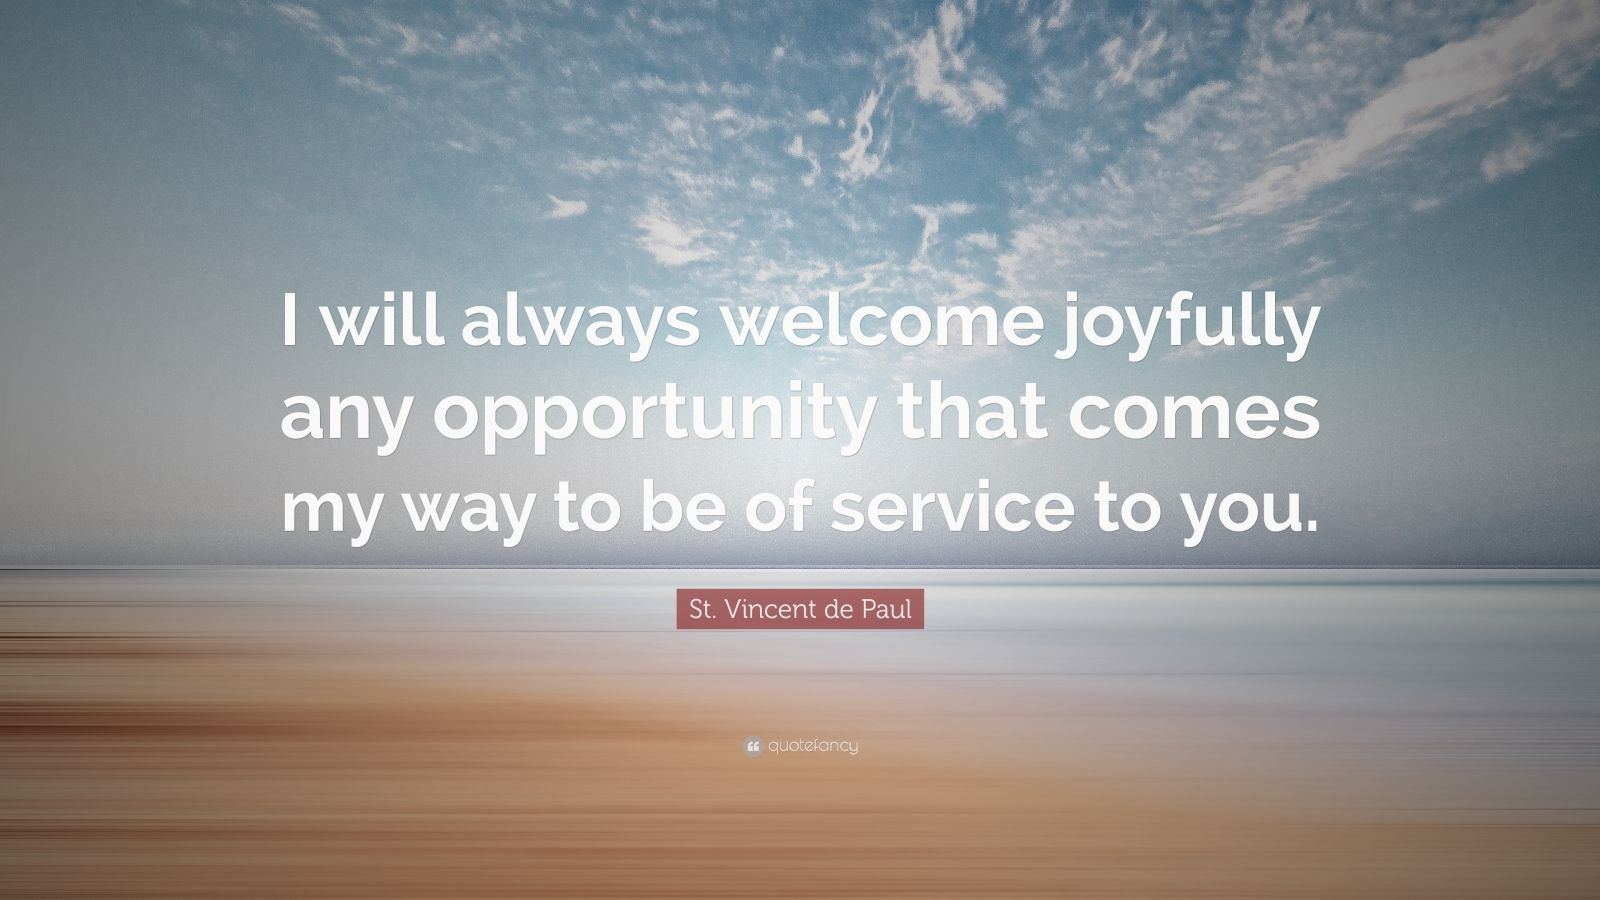 St. Vincent de Paul Quote: “I will always welcome joyfully any